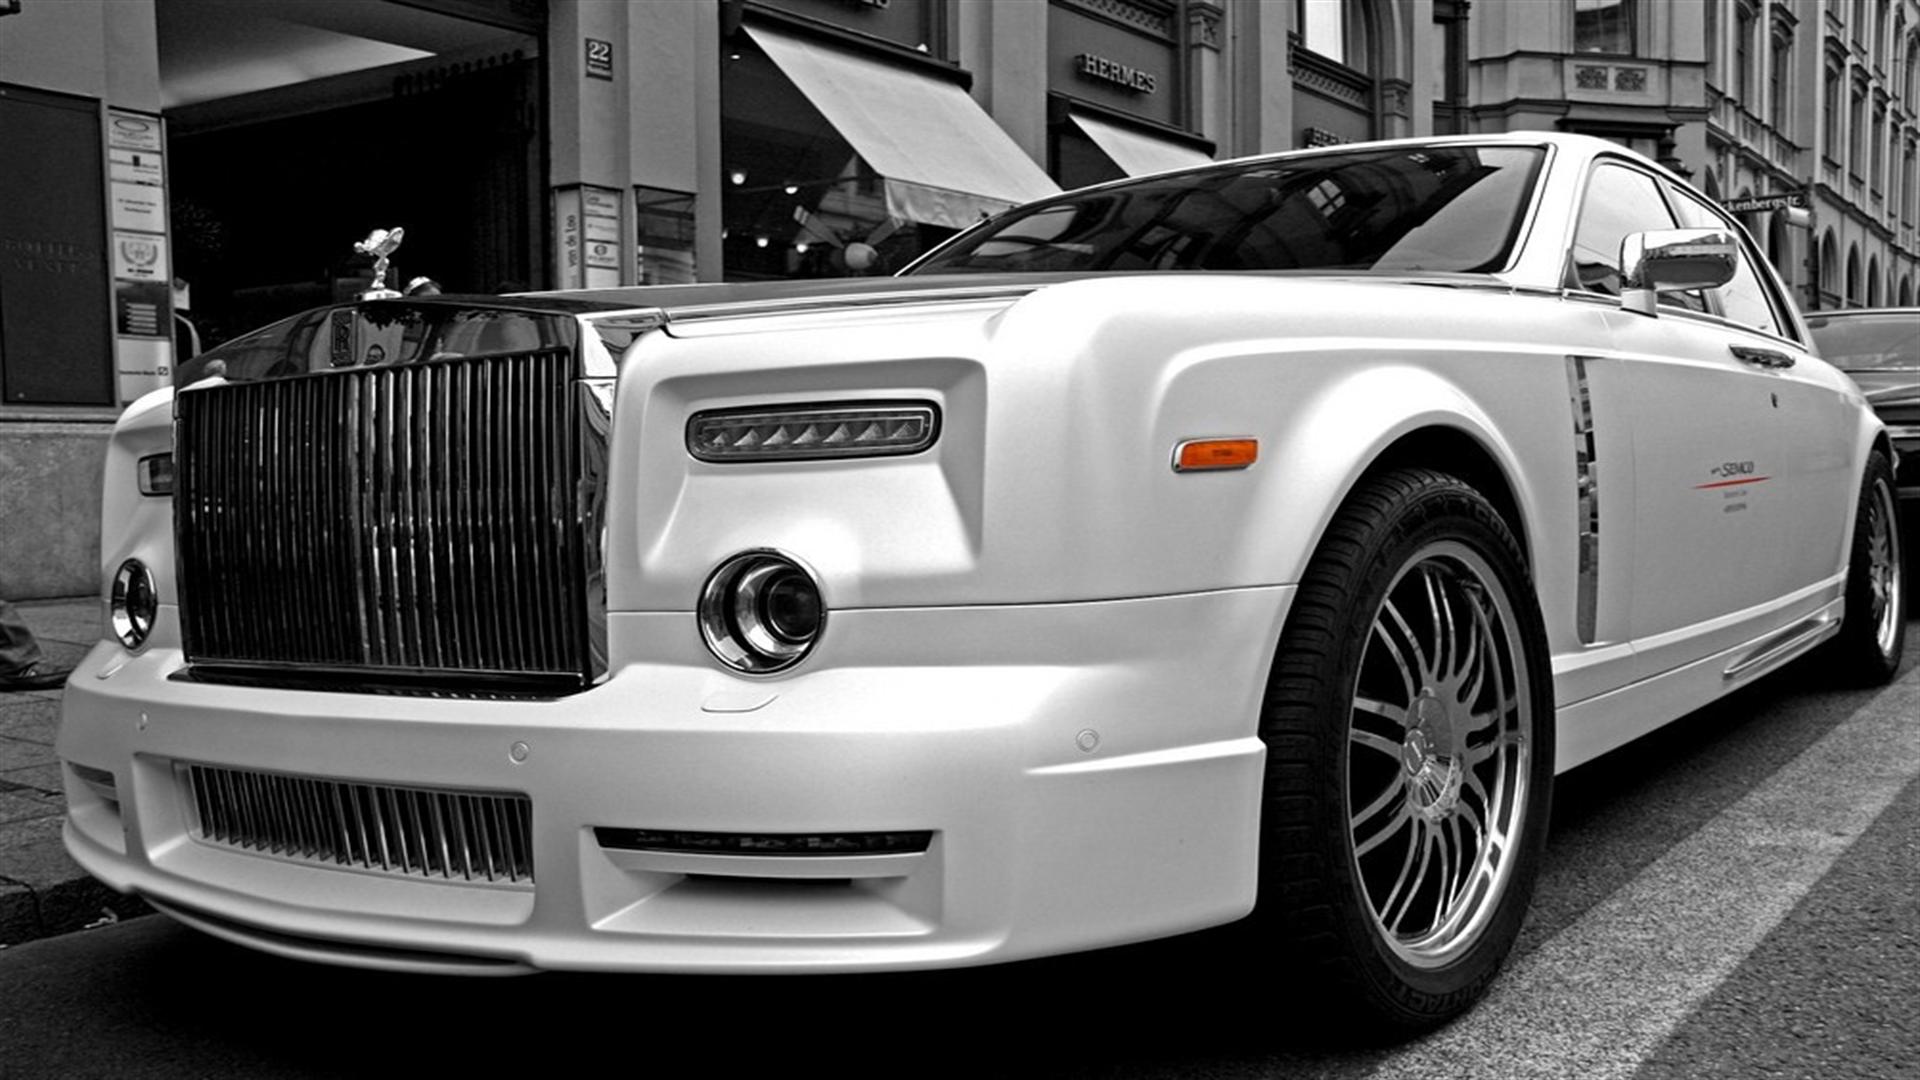 Wallpaper Mansory Rolls Royce Wraith HD Car With Image Of Mobile